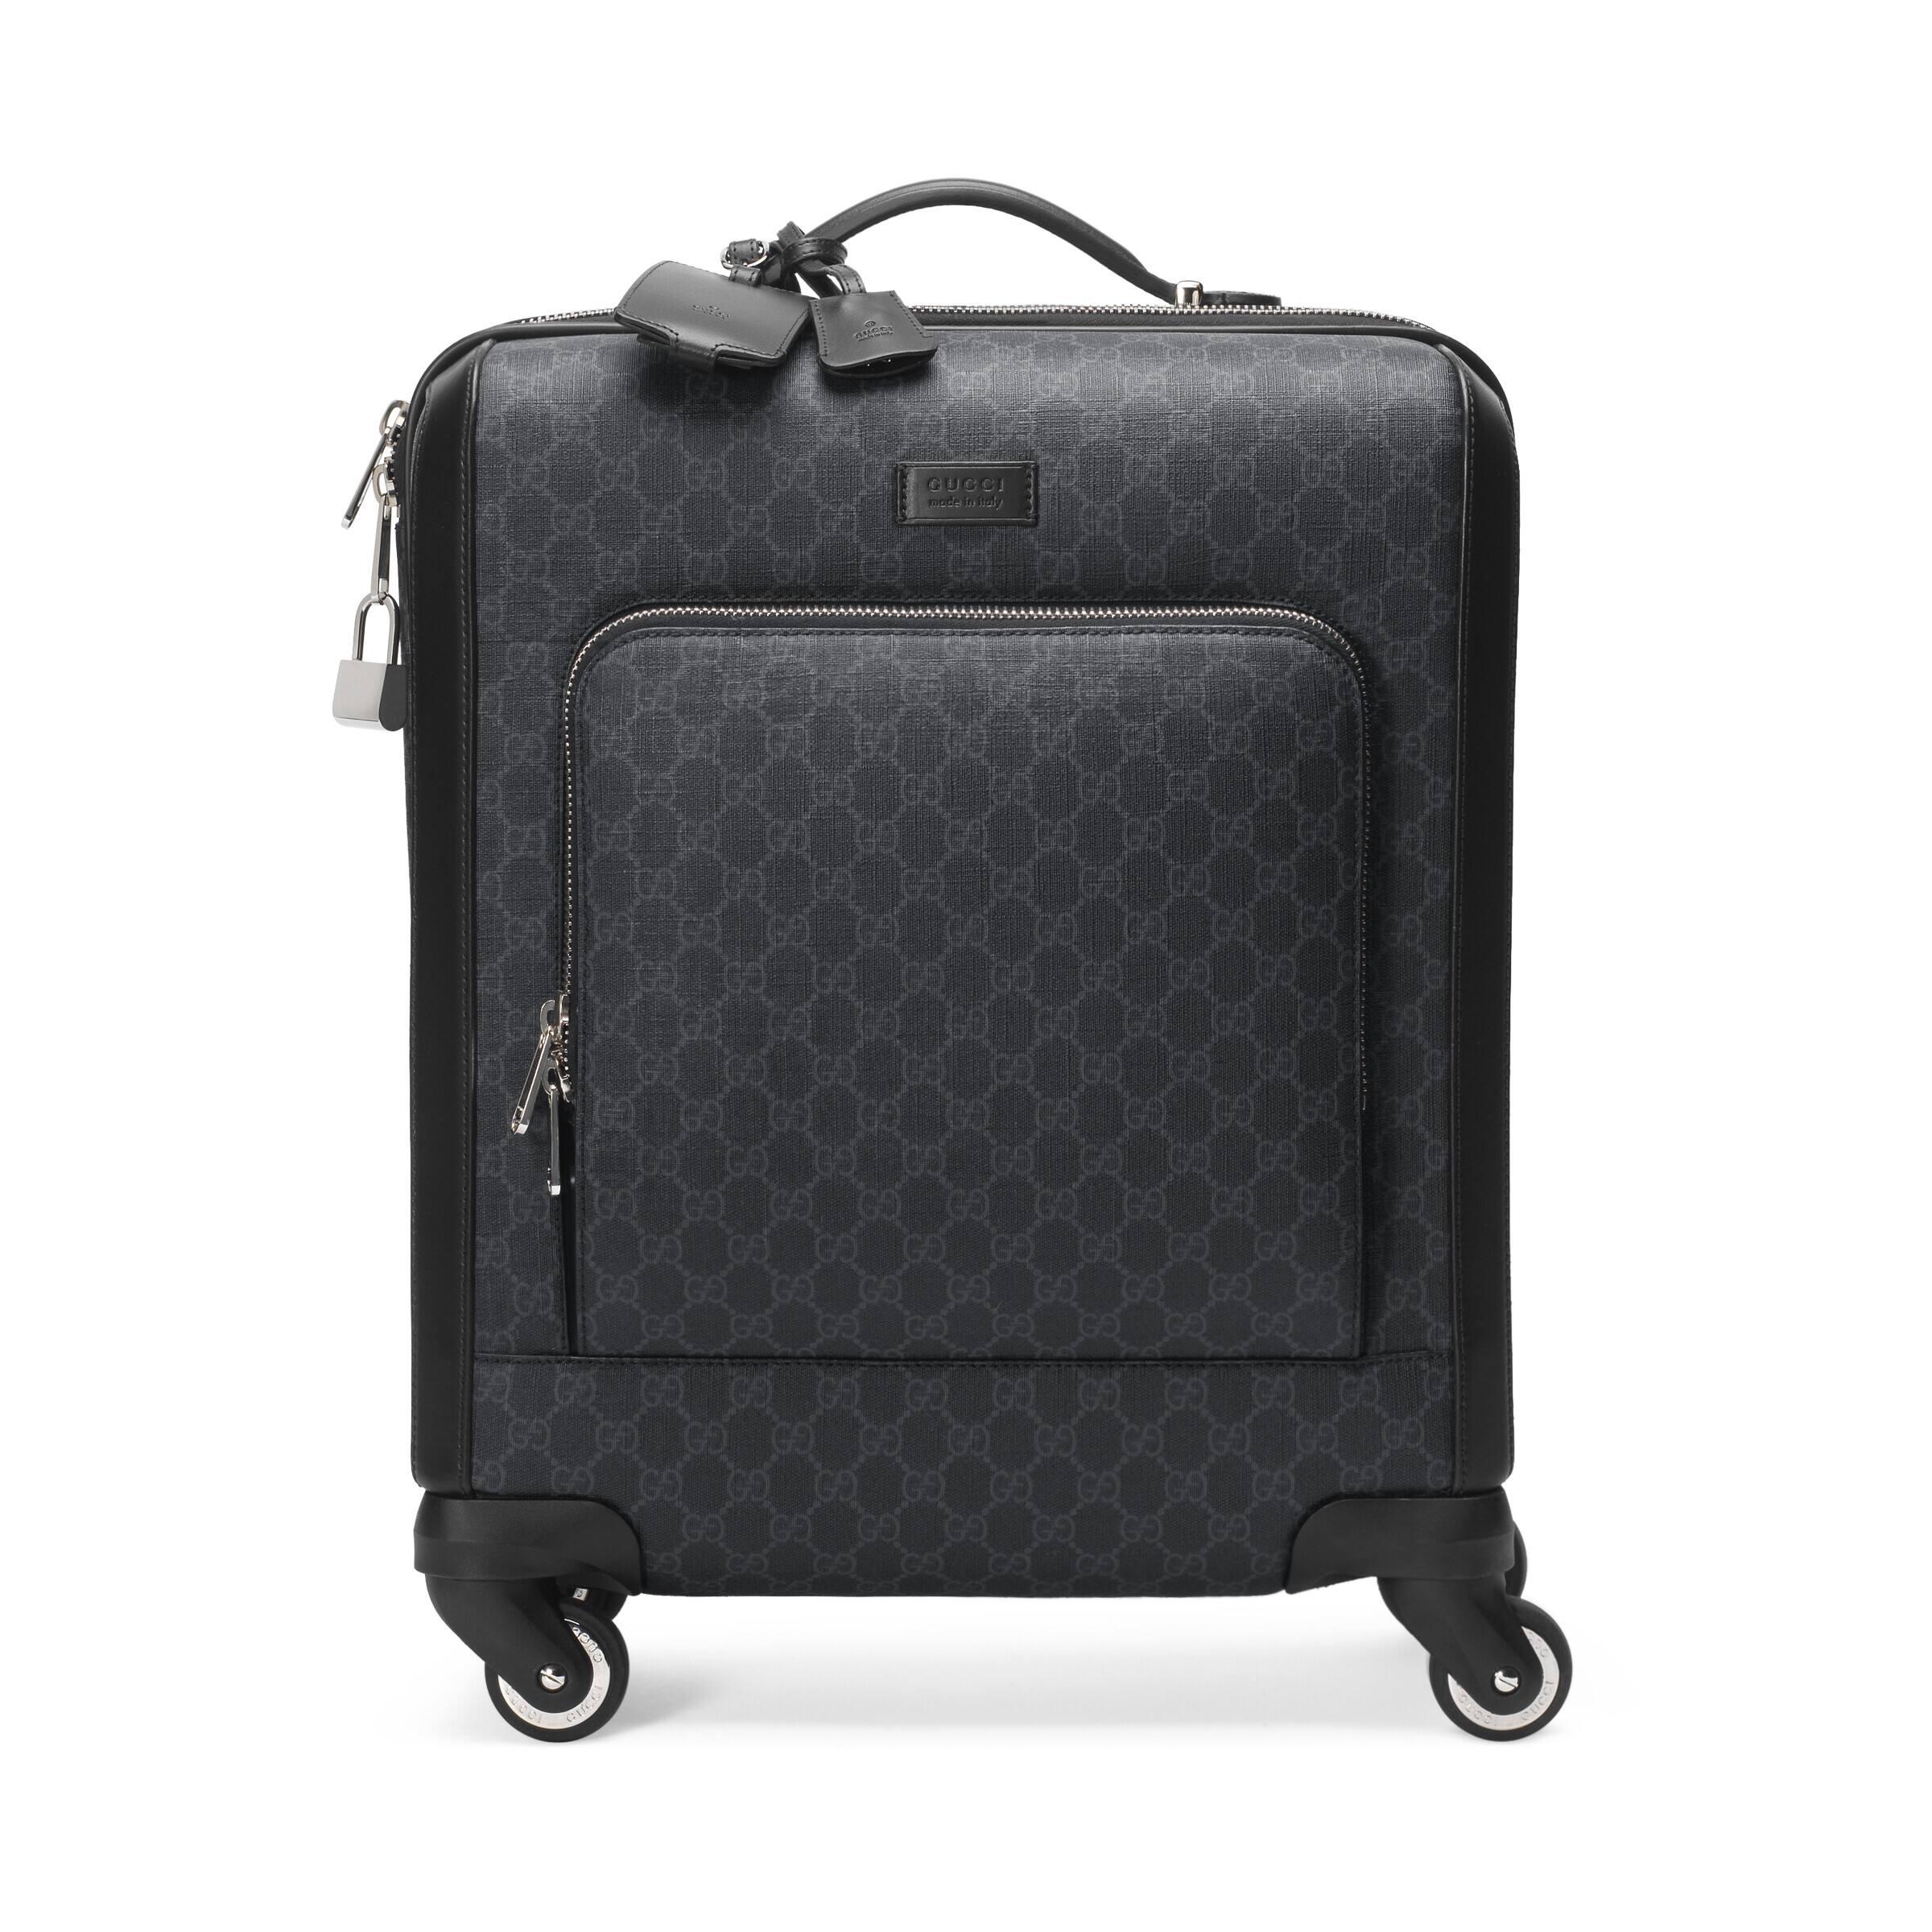 Gucci Canvas GG Supreme Suitcase in Black for Men - Save 20% | Lyst